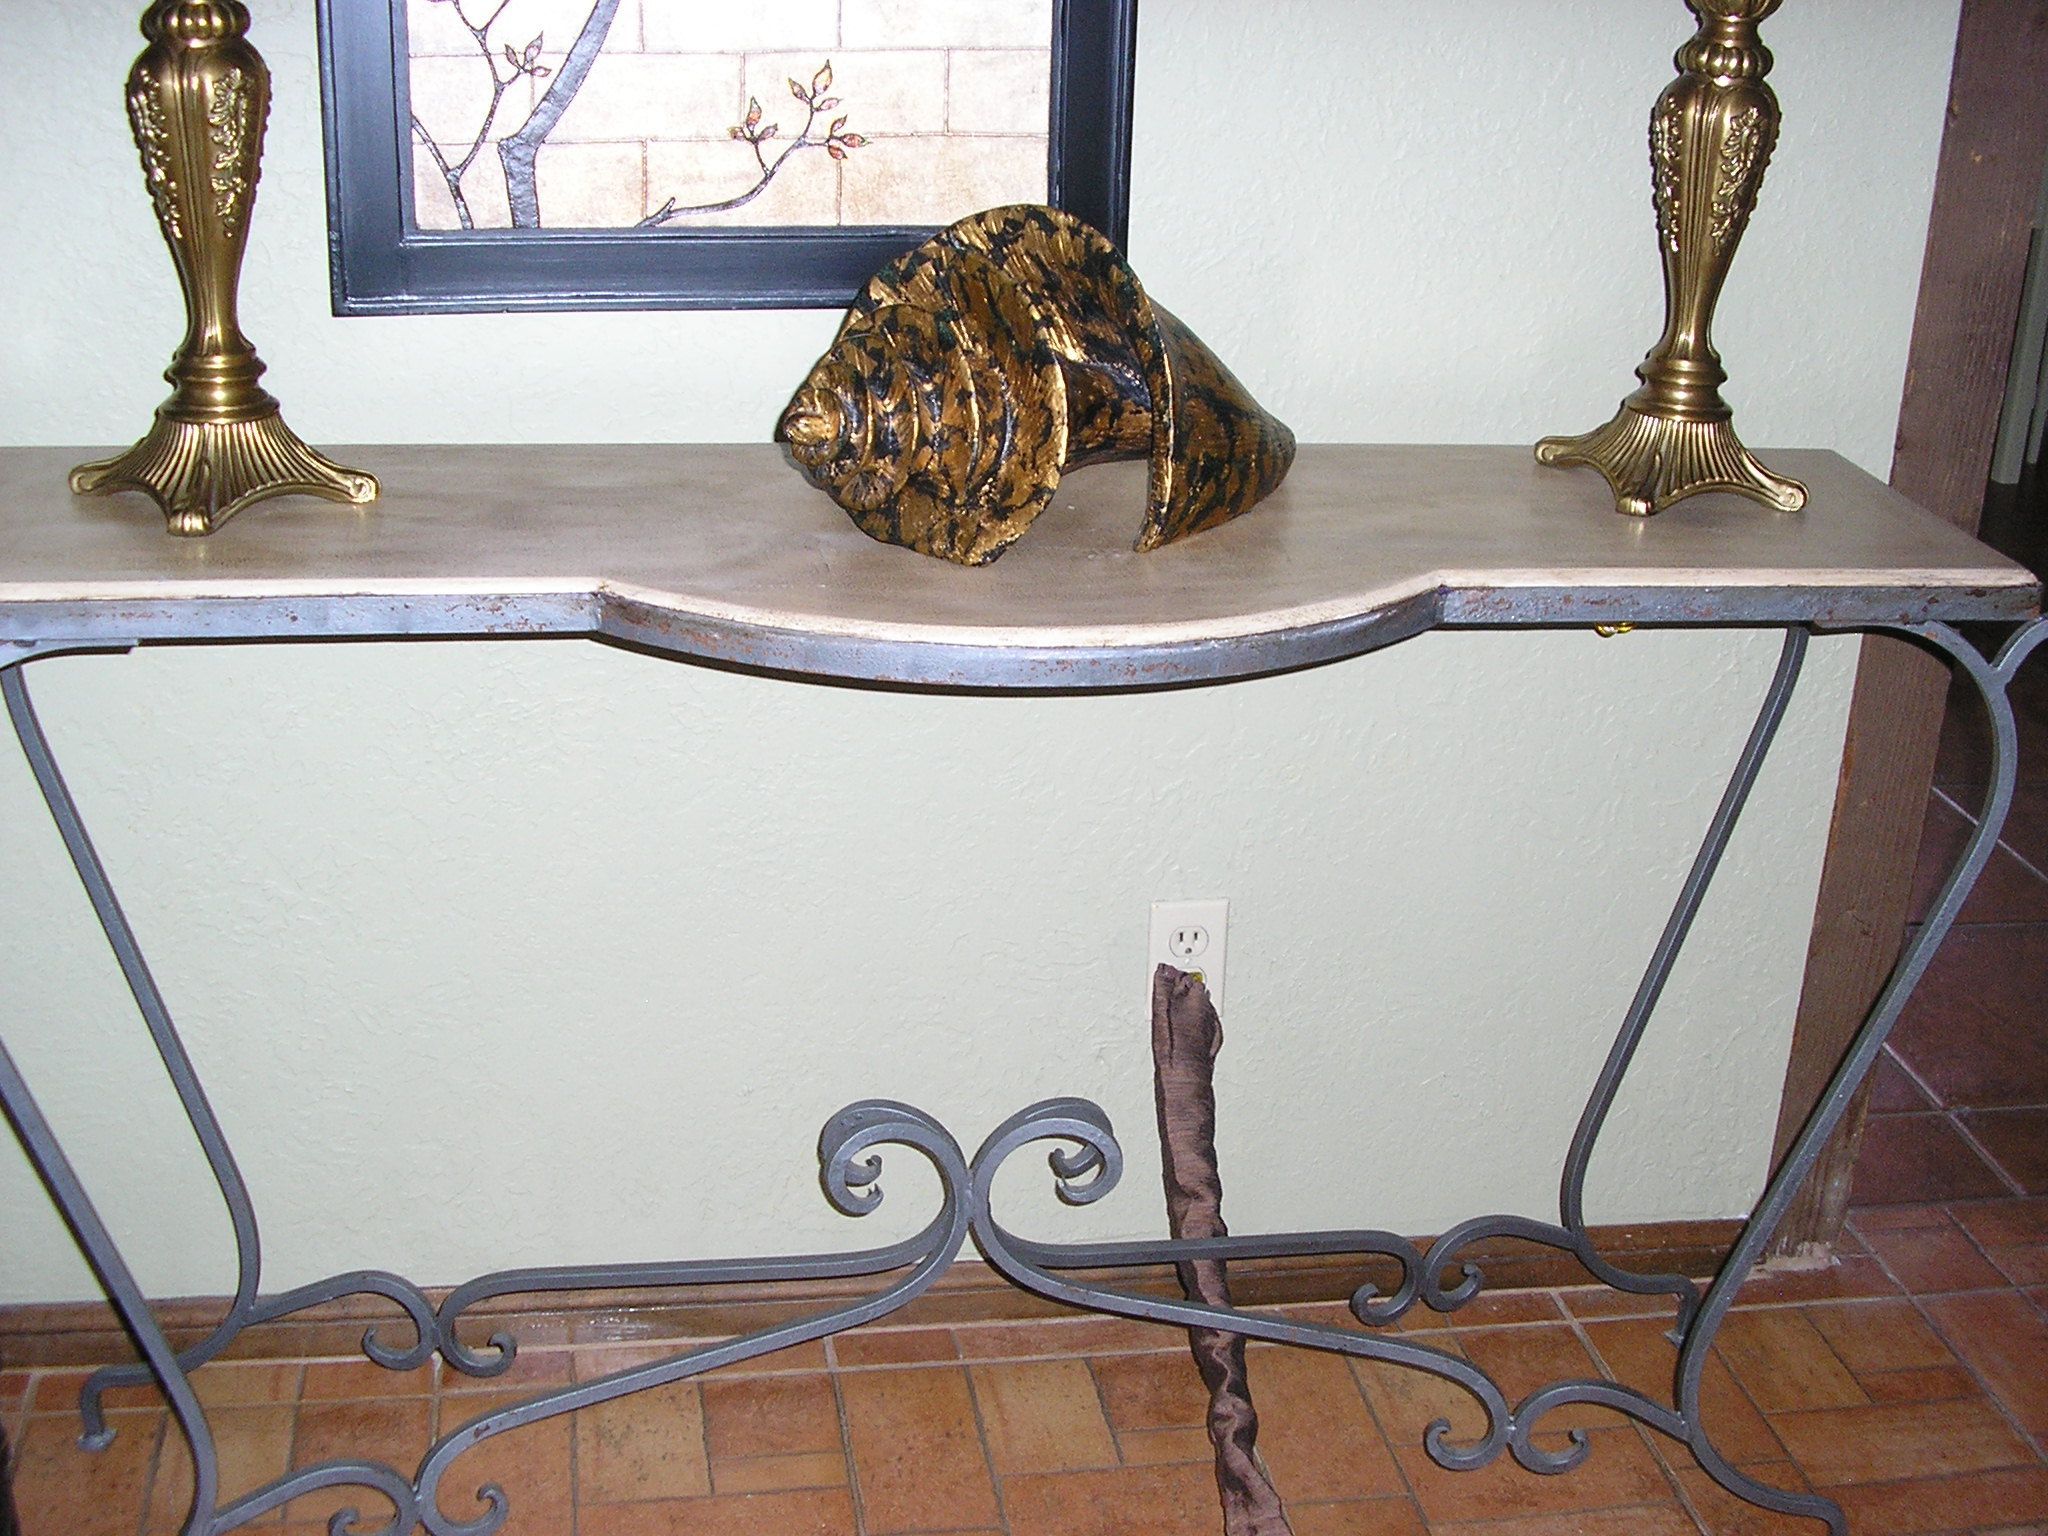 Beautiful Sofa Table With Wrought Iron Decorative Base Regarding Oval Aged Black Iron Console Tables (View 9 of 20)